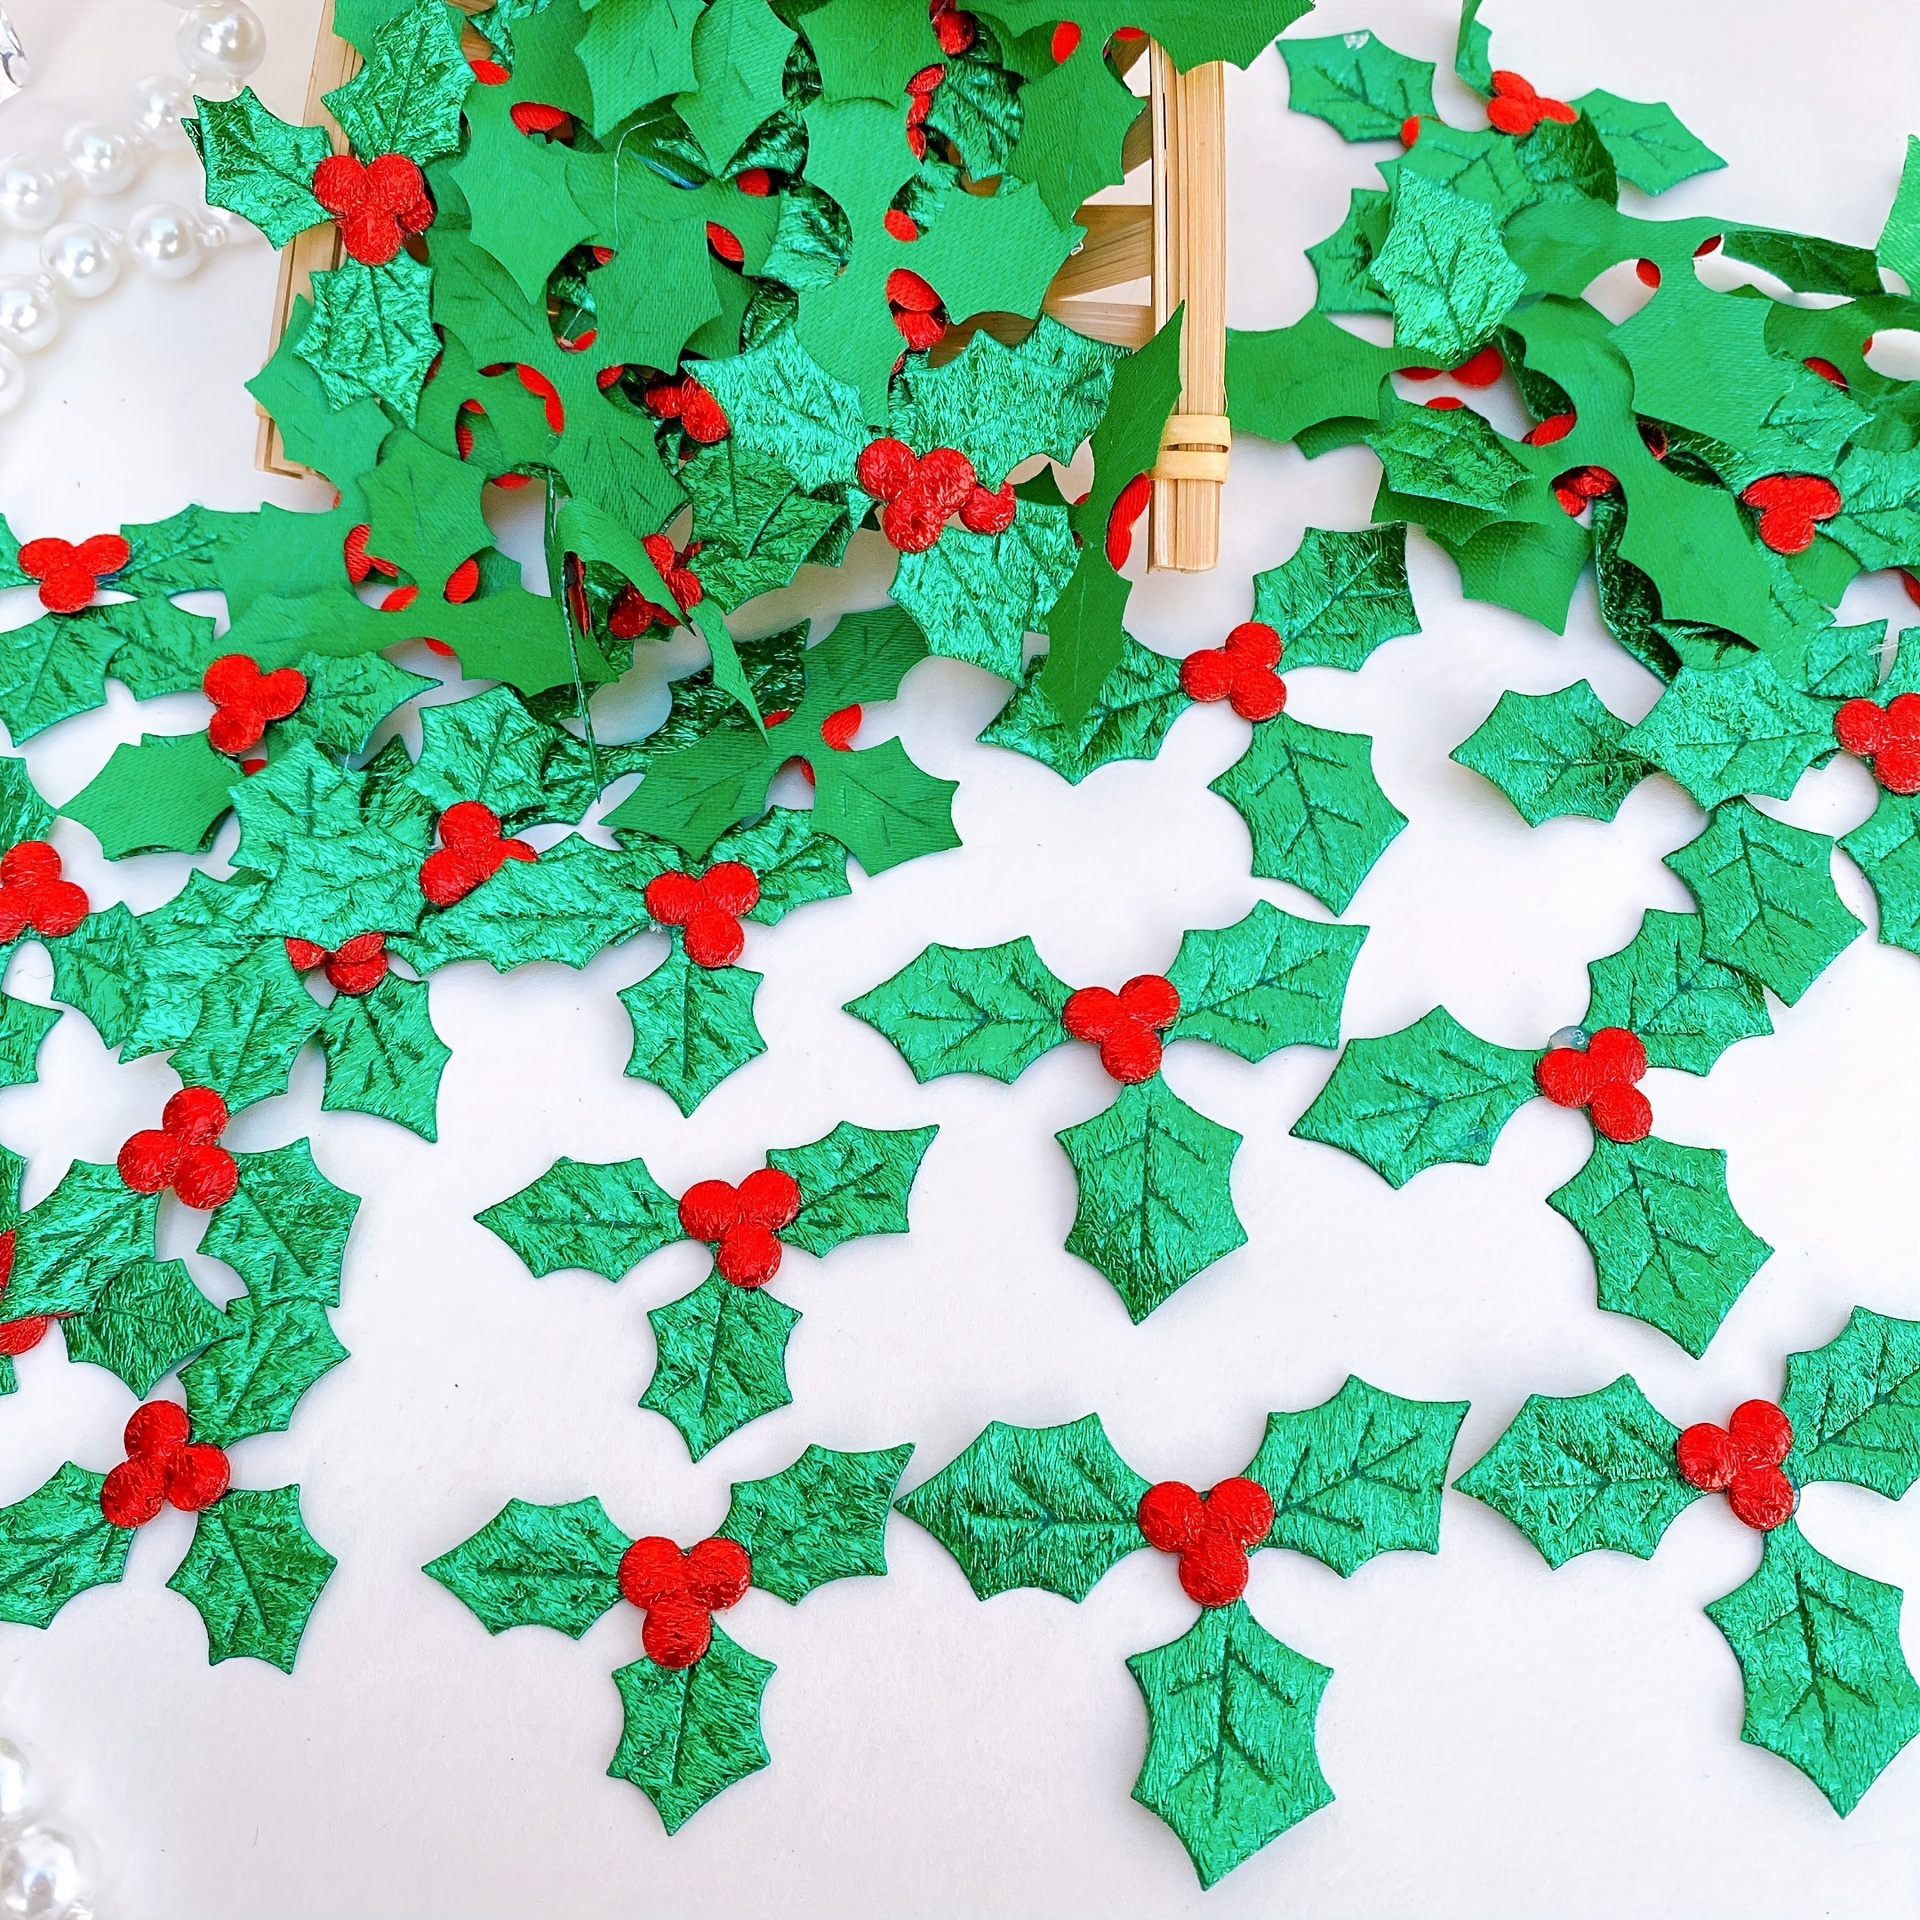 

100pcs Fabric Holly Berry With Green Leaves Christmas Headdress, Leaf Stickers For Diy Hair Accessories